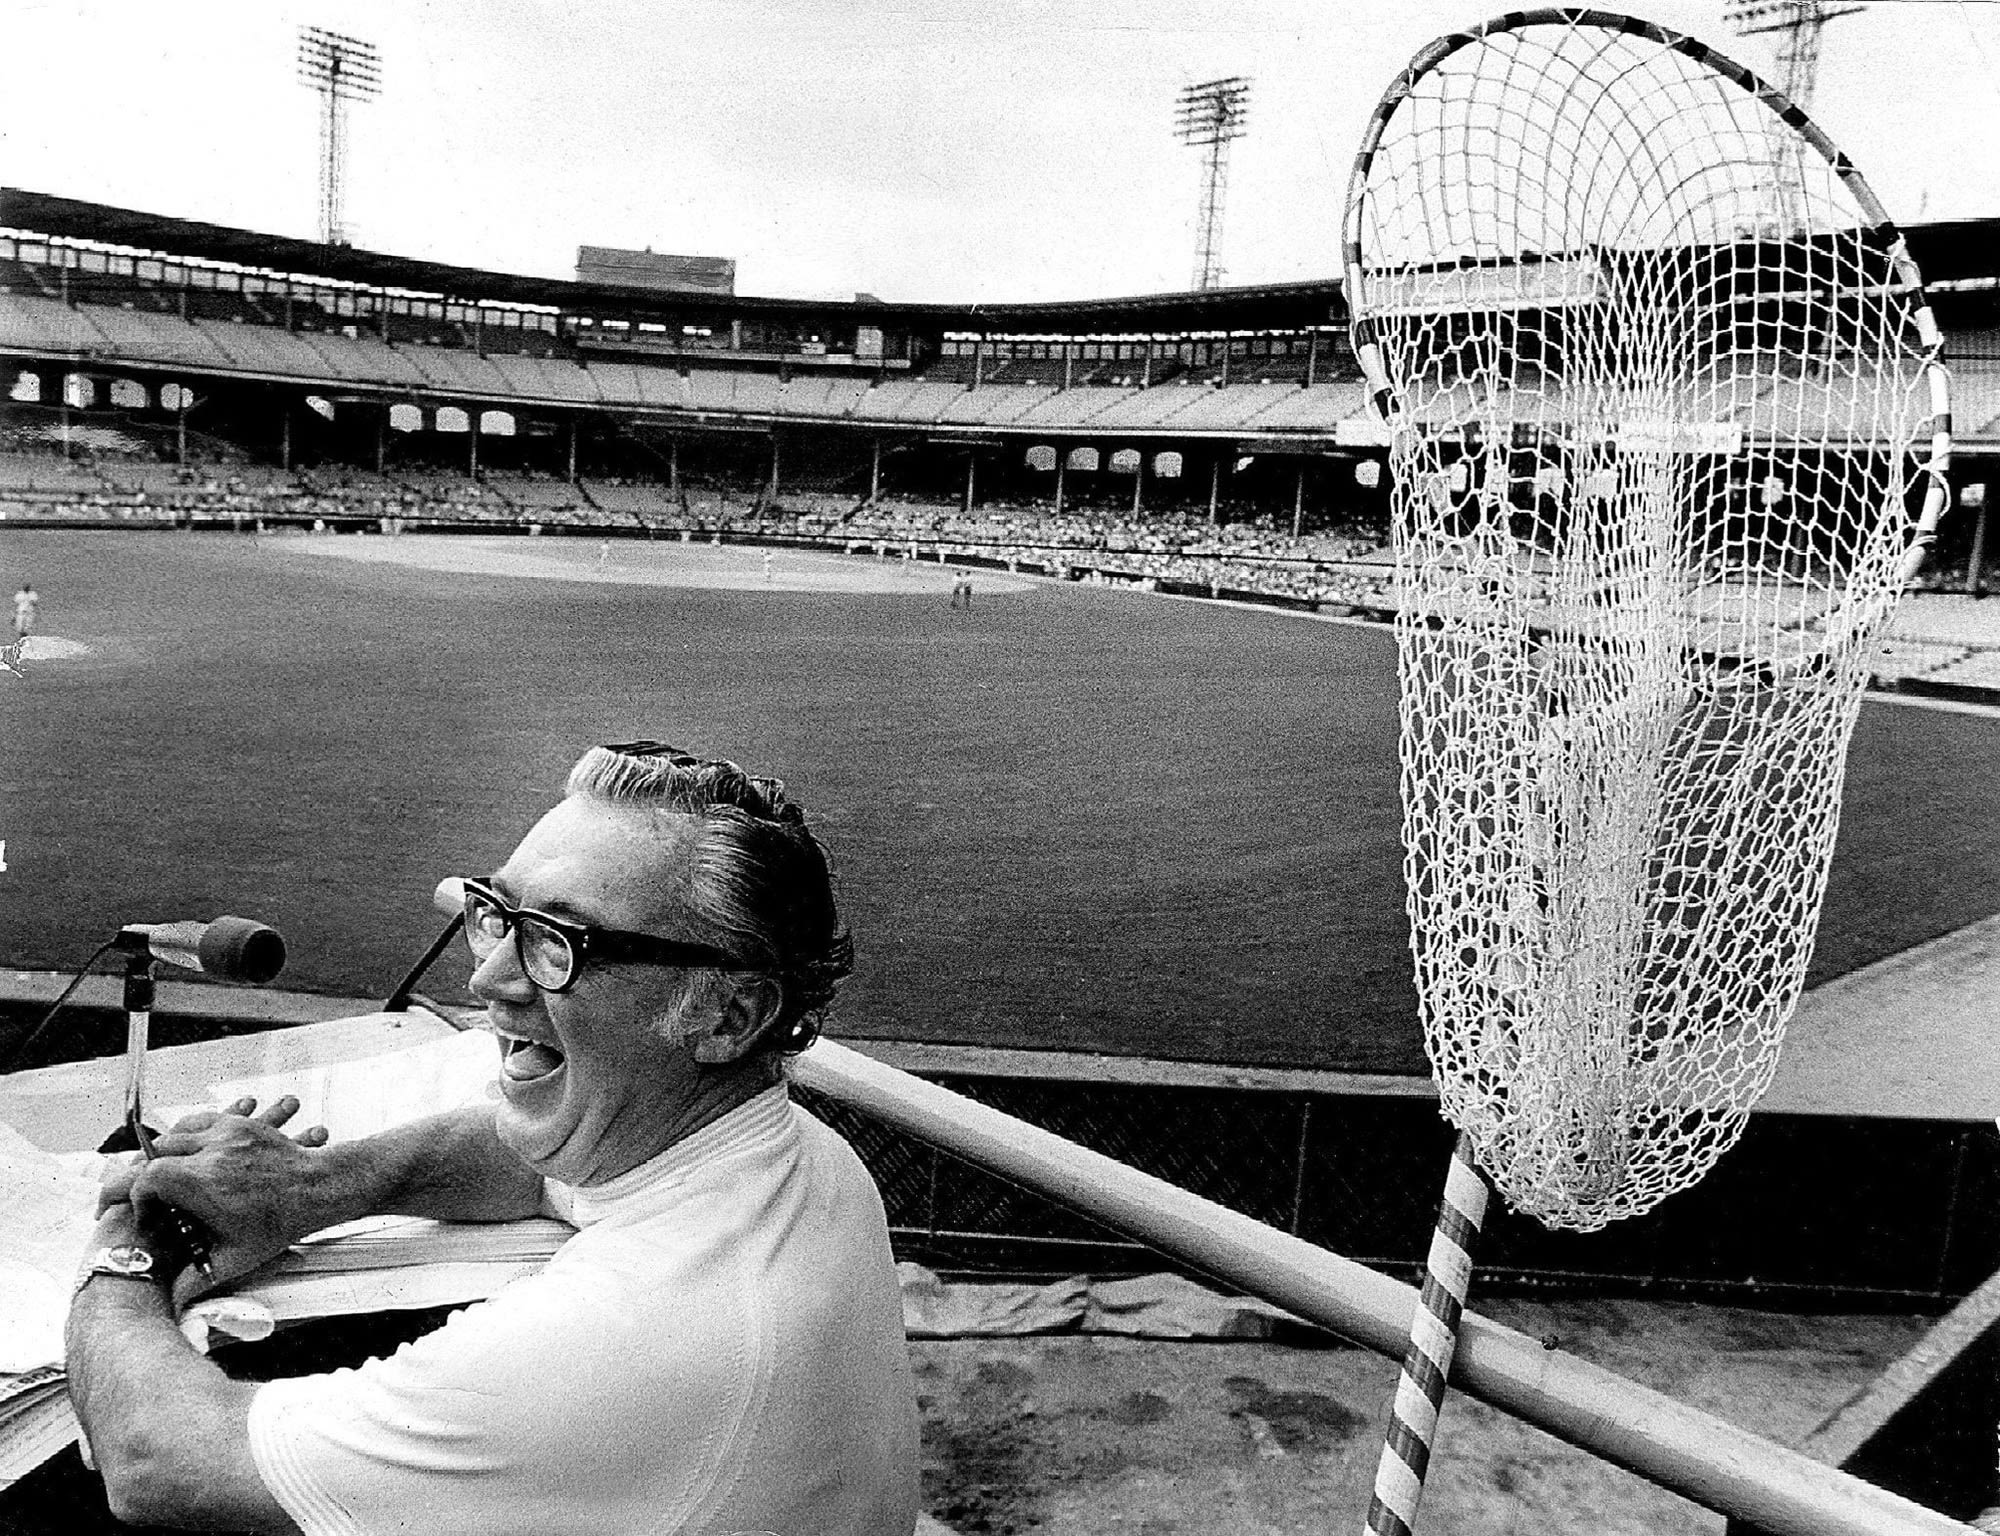 Paul Sullivan: Don’t forget Harry Caray’s legacy with the White Sox — for calling it like it is